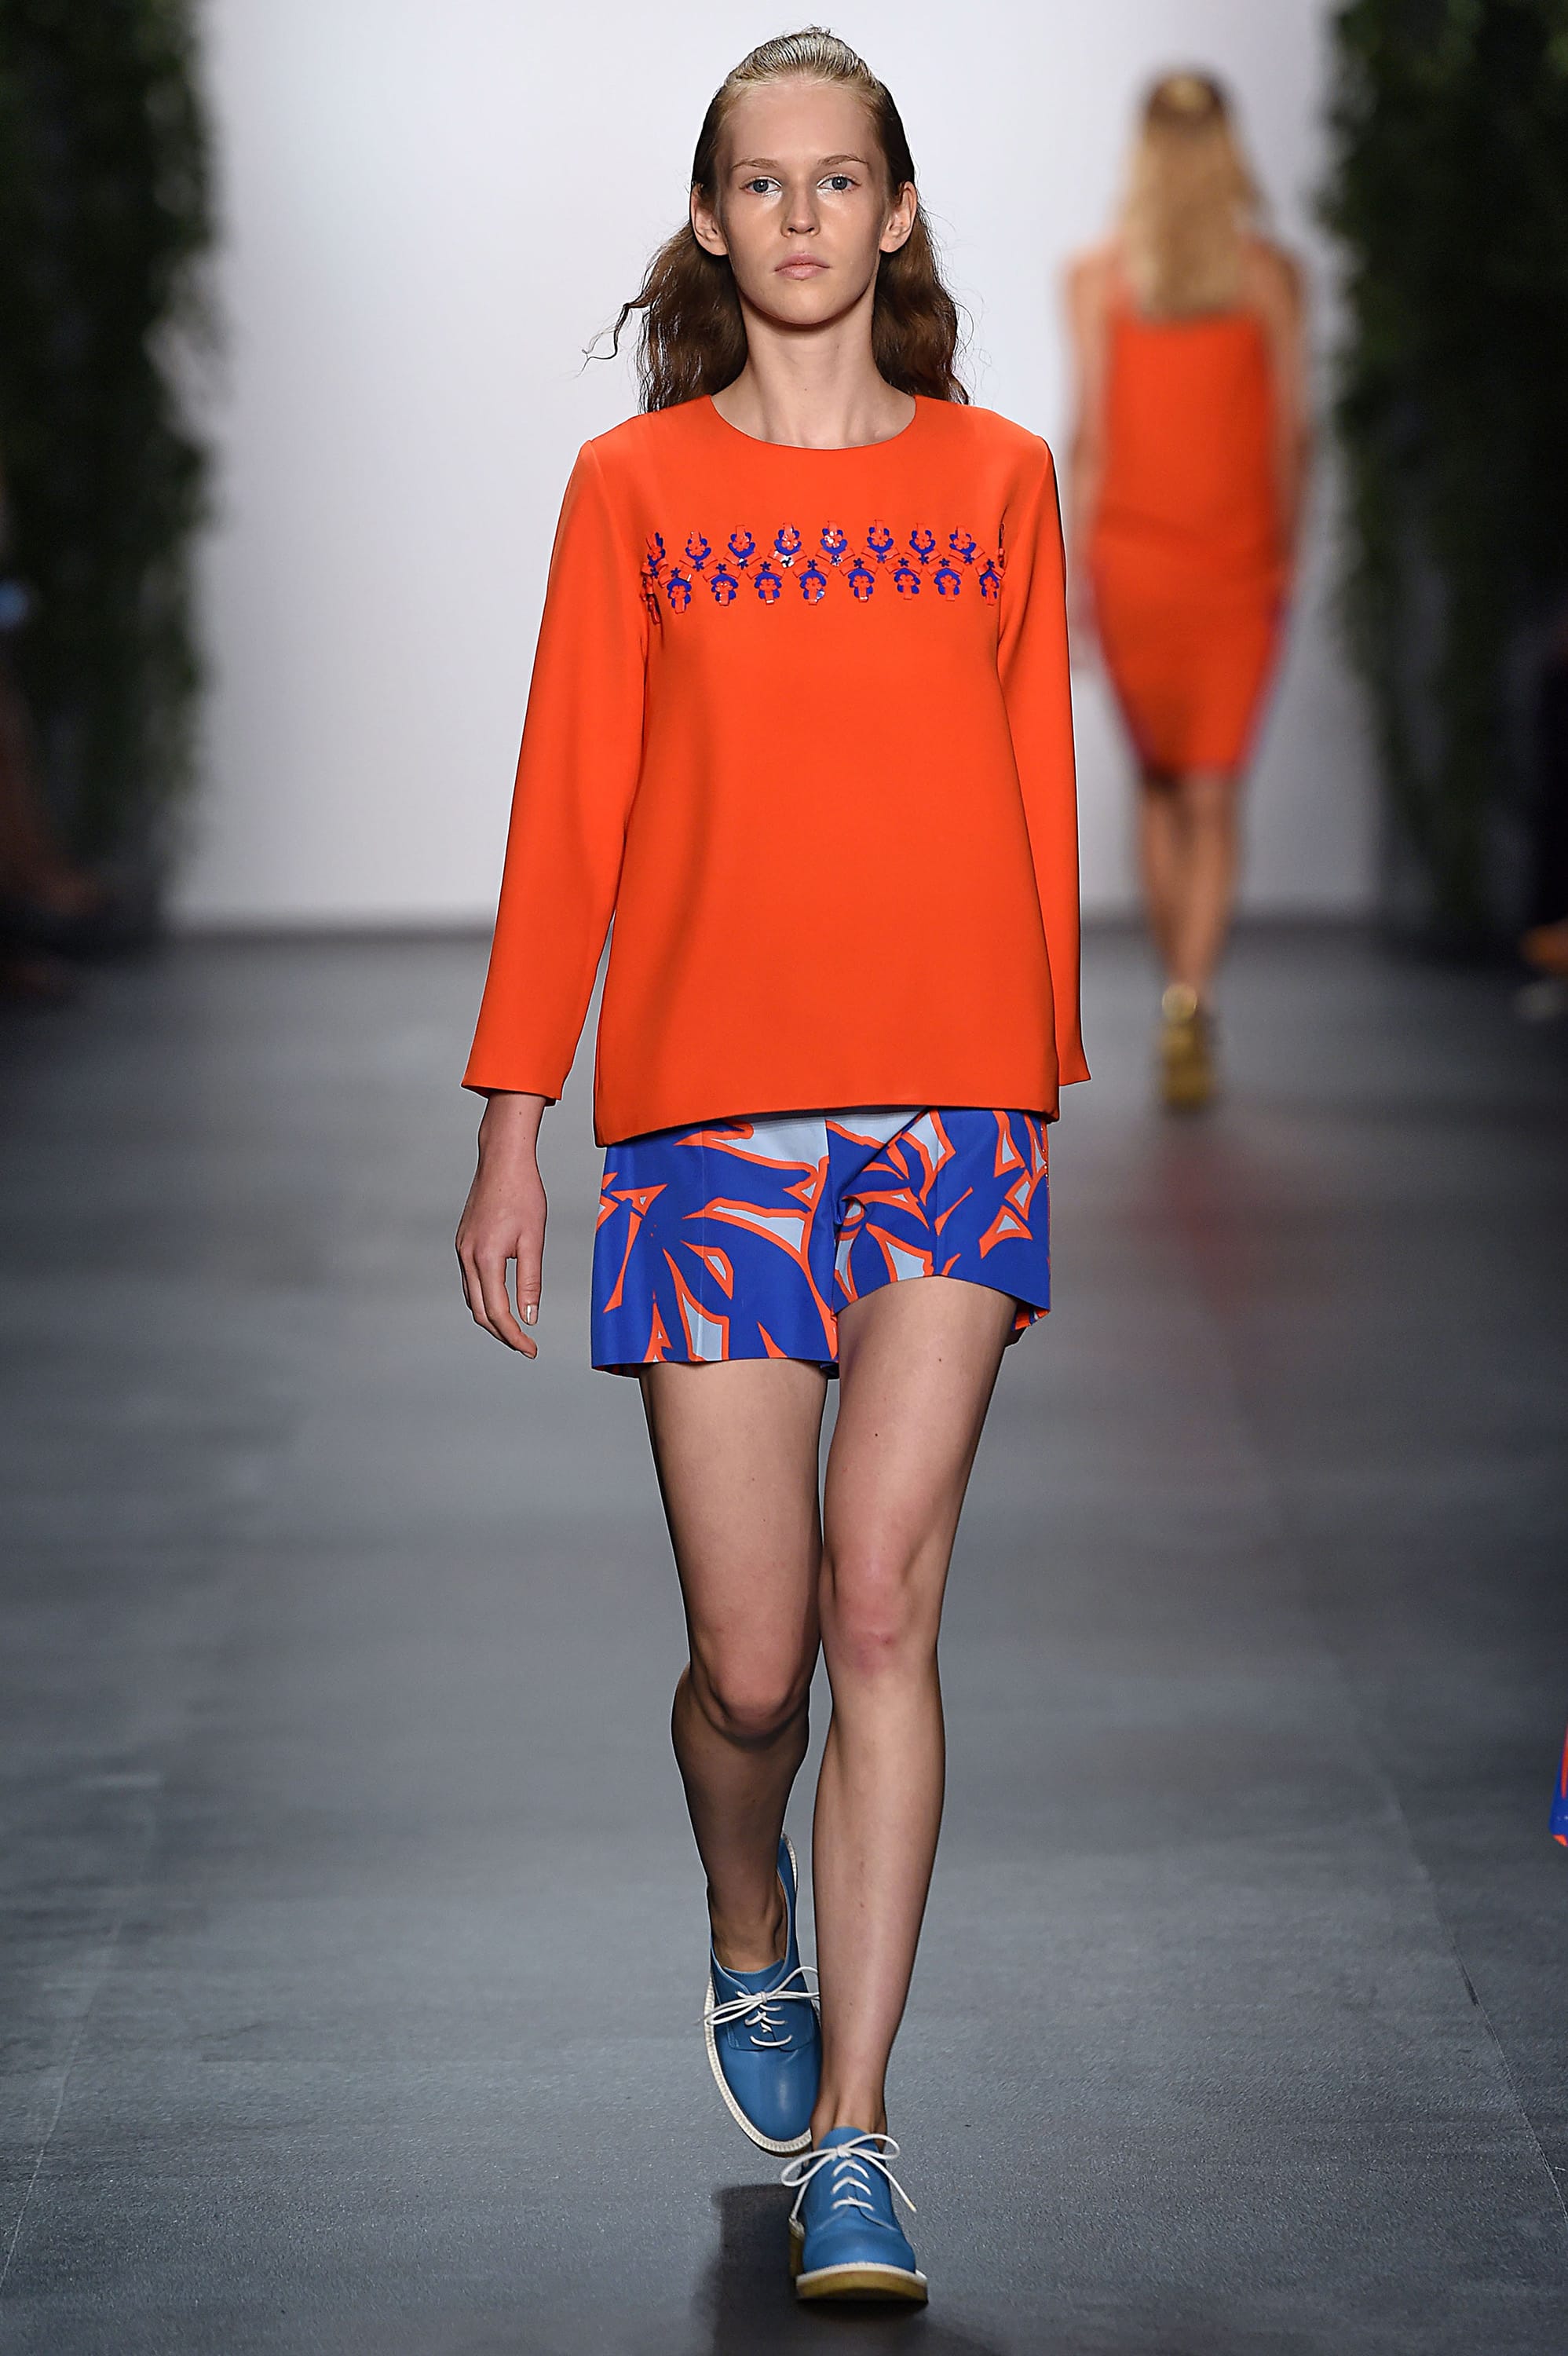 Separates in shades of vibrant fiesta red and rich snorkel blue, two of Pantone's popular color picks for spring, are seen on the runway in the Noon by Noor spring 2016 show at New York Fashion Week.